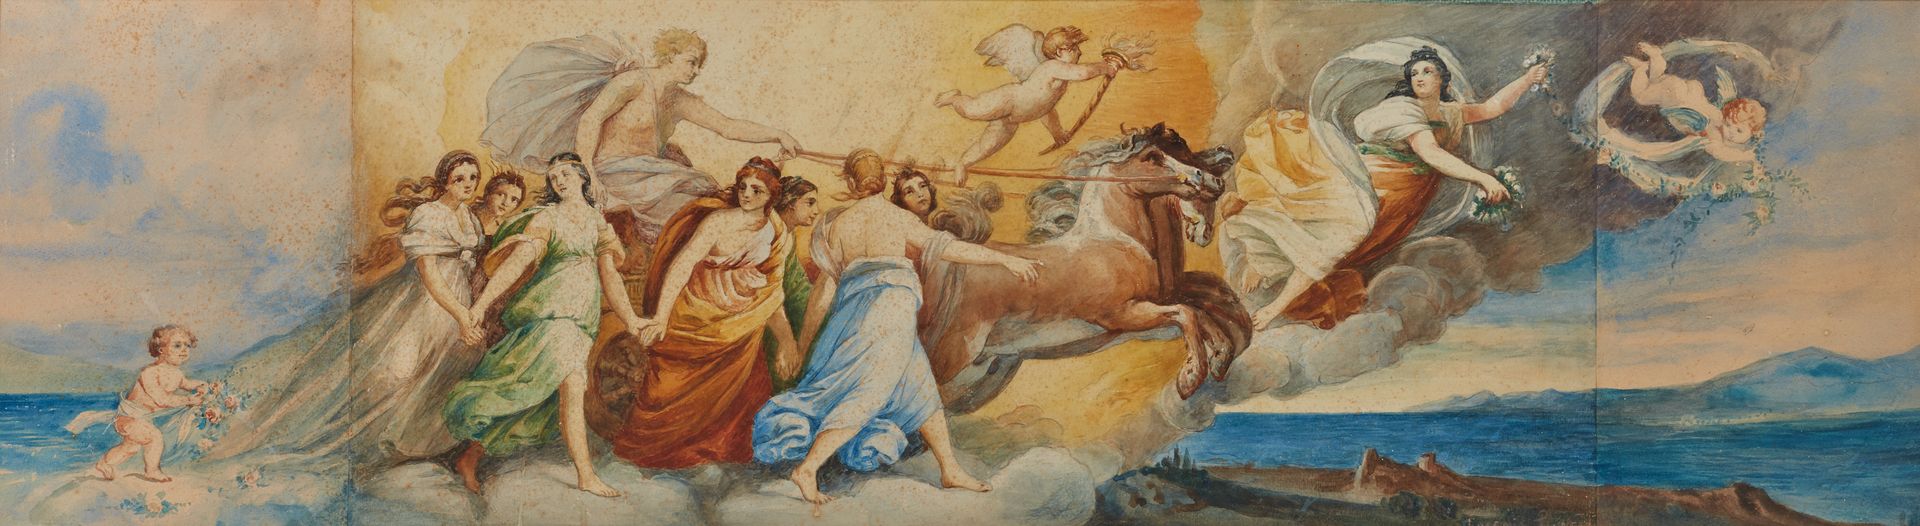 Null After Guido RENI (1575-1642)

The chariot of the Dawn

Watercolor on three &hellip;